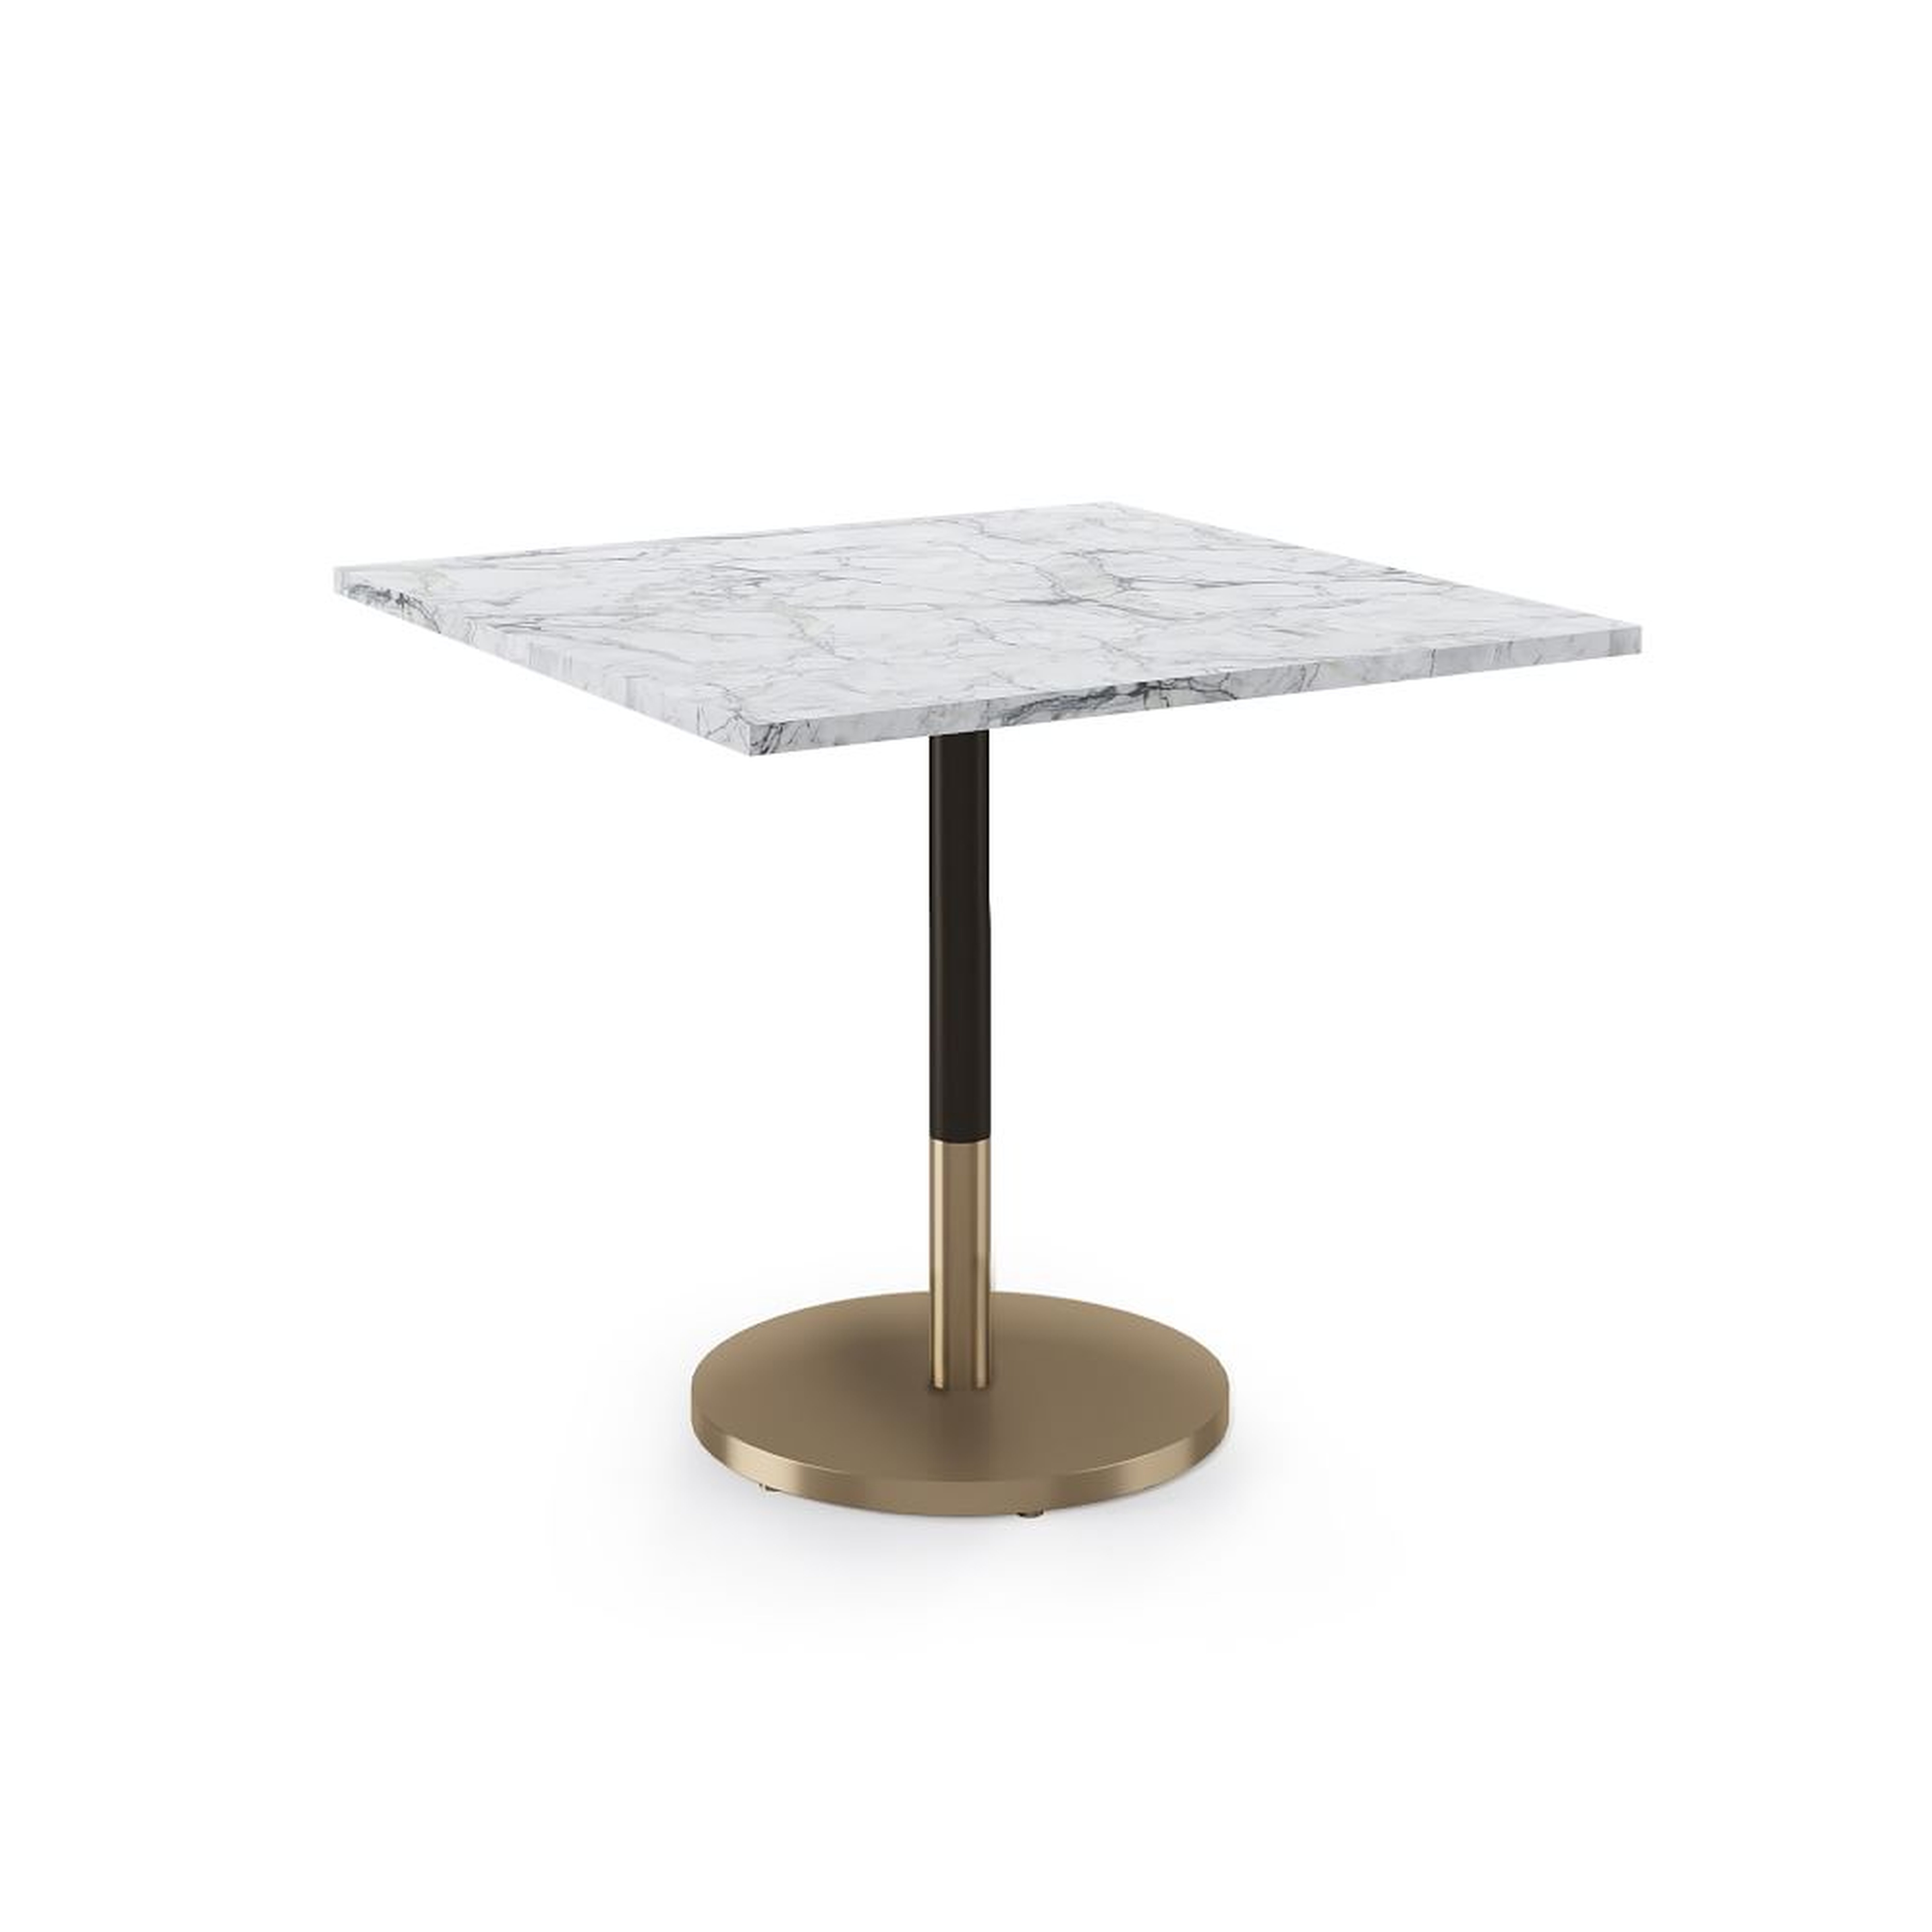 Restaurant Table:Top 36" Square: White Faux Marble + Dining Ht Orbit Base: Bronze/Brass - West Elm